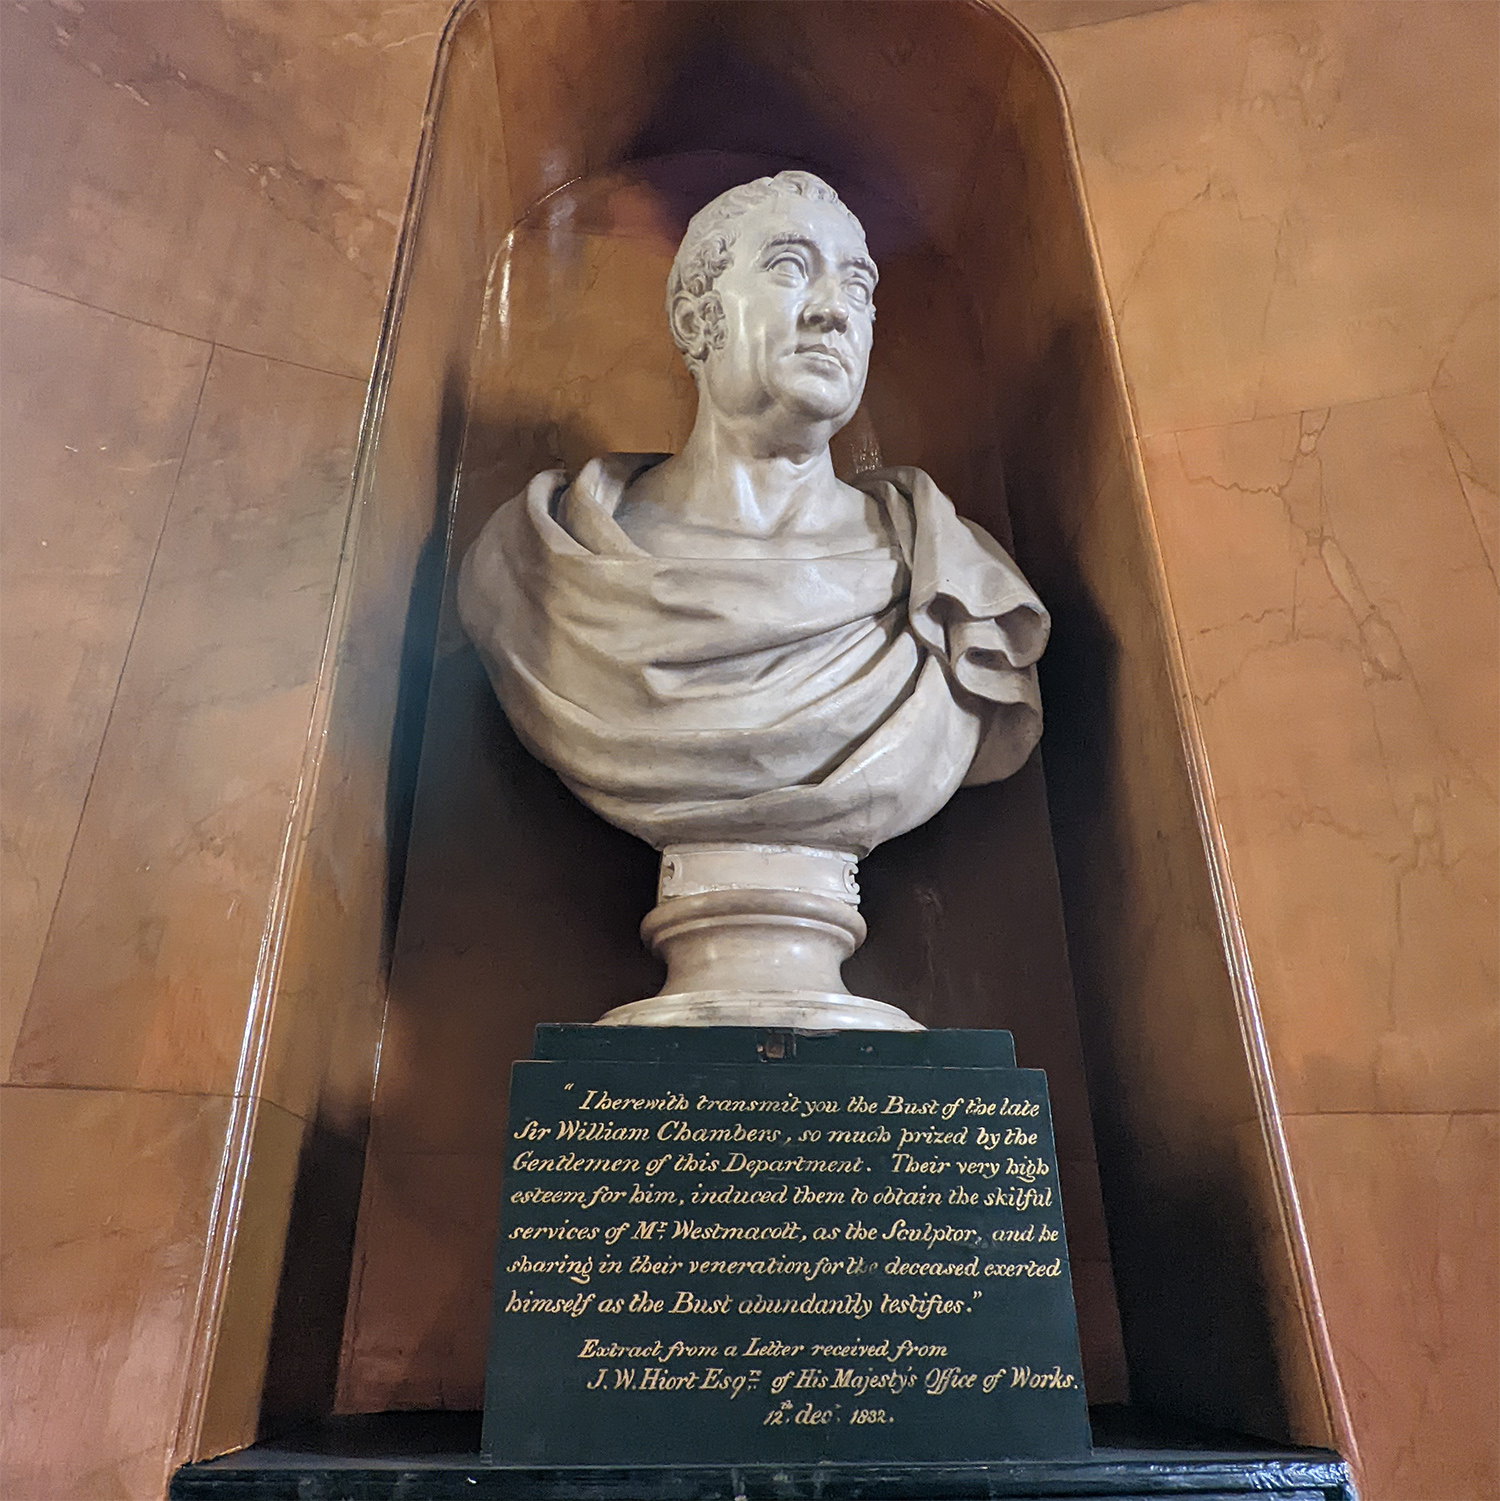 A bust of William Chambers.